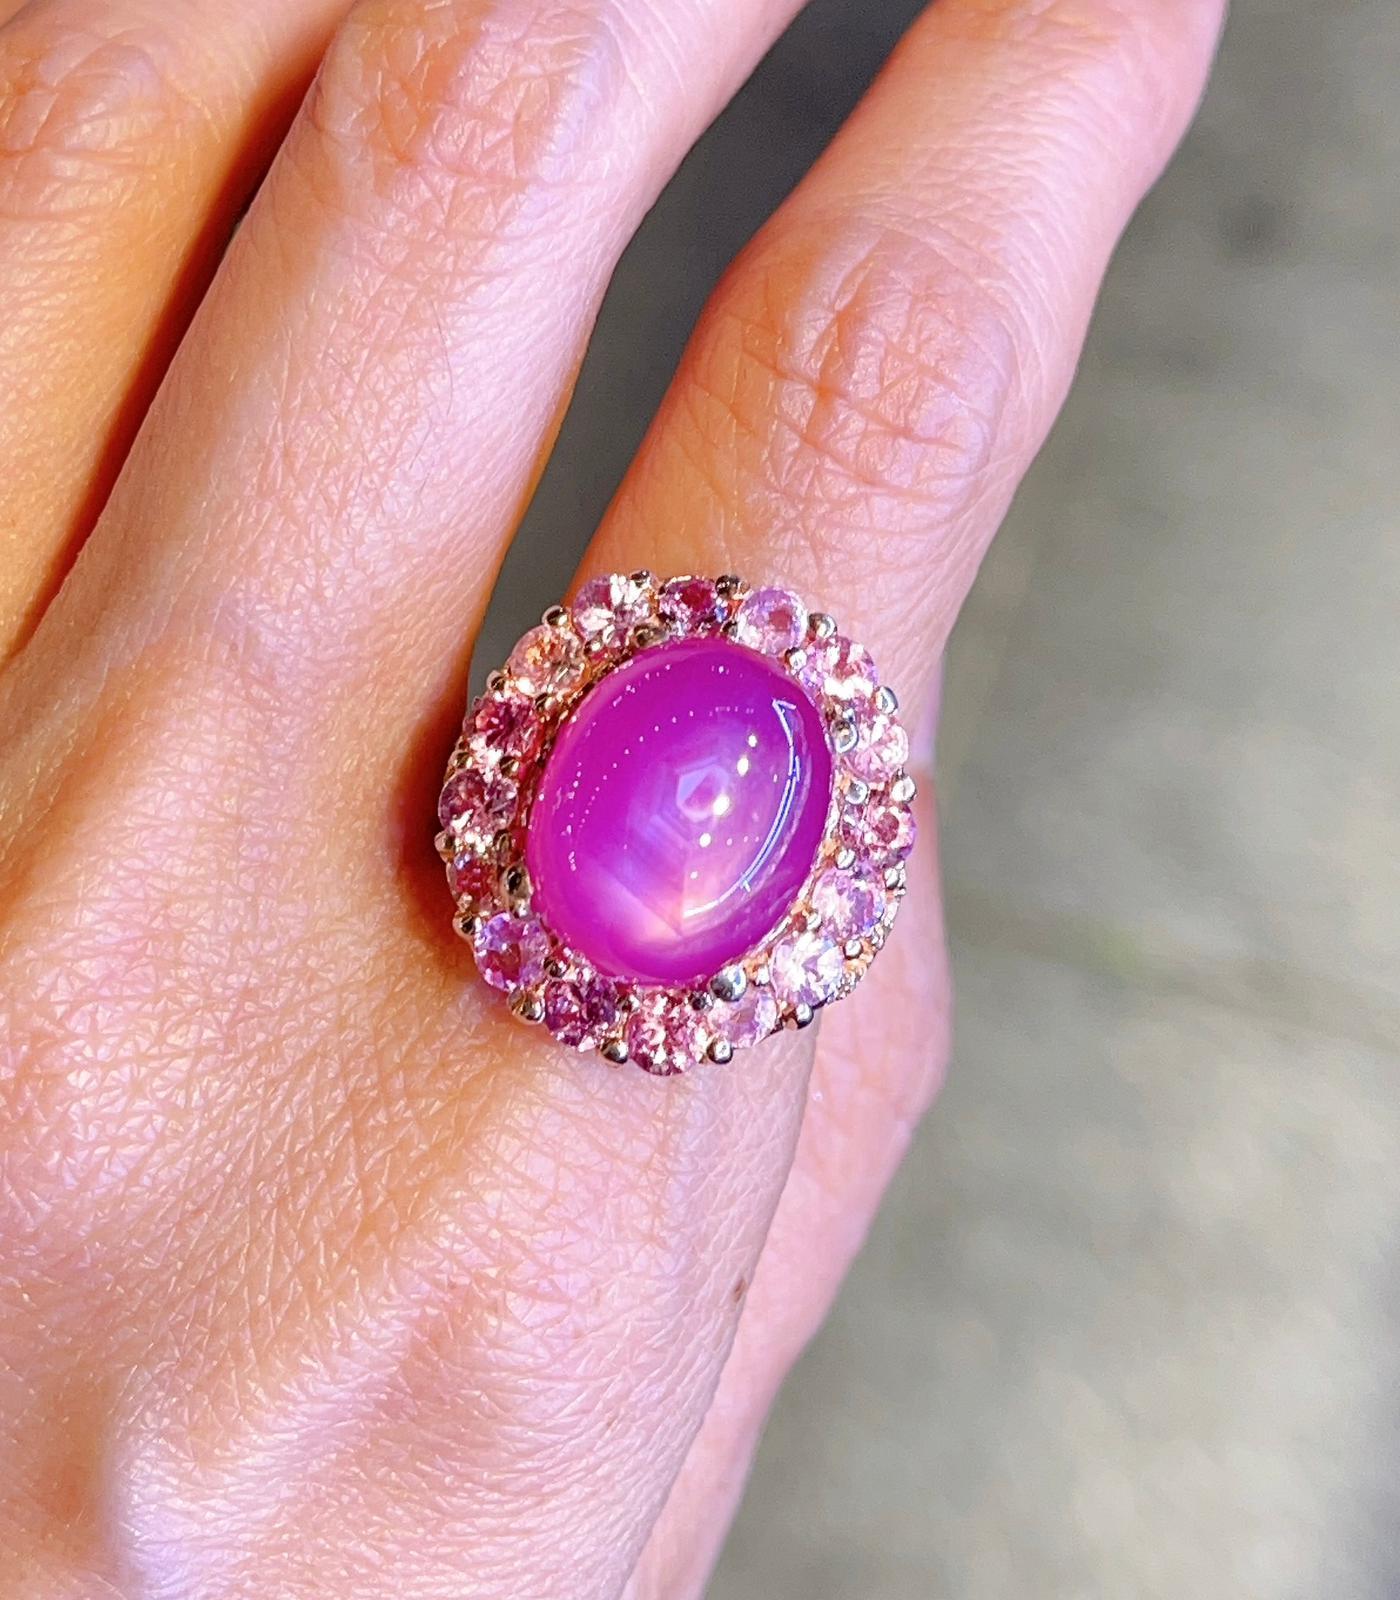 Bochic “Capri” Star Ruby Ring with Pink Sapphires set in 22K Gold & Silver 2